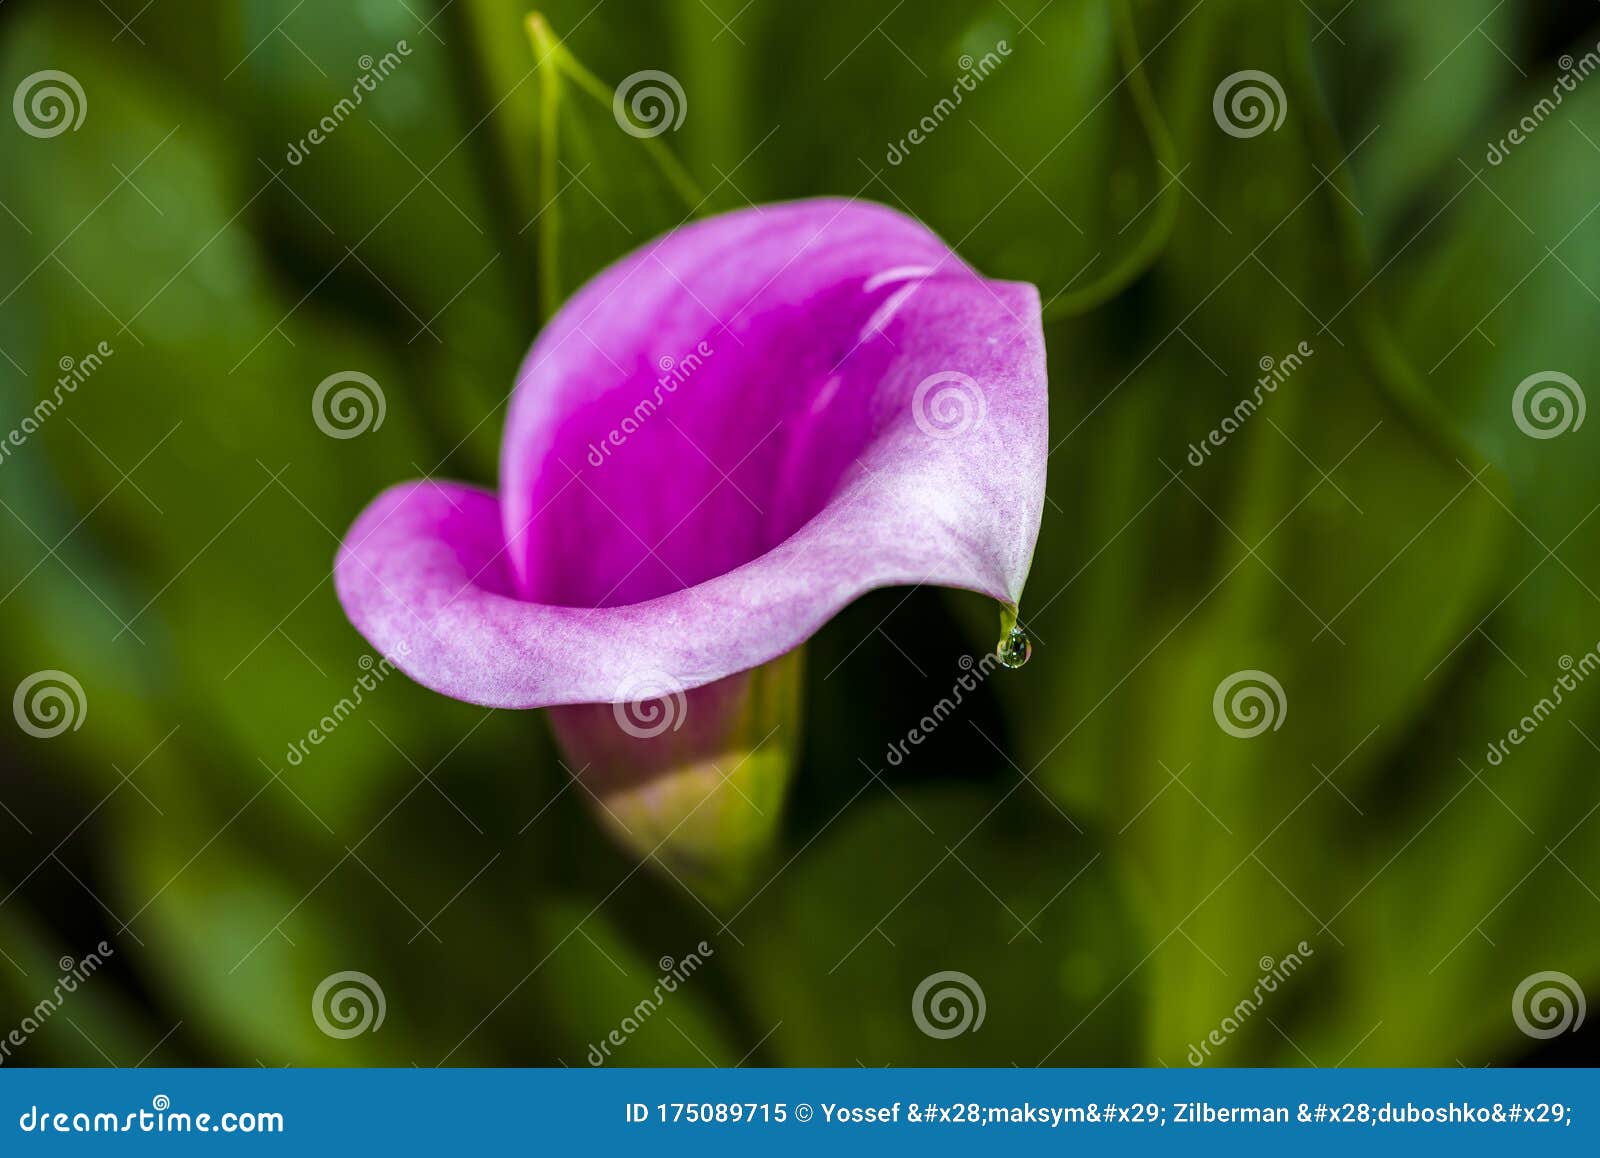 Violet Calla Lily with a Droplet on the Tip Stock Image - Image of ...